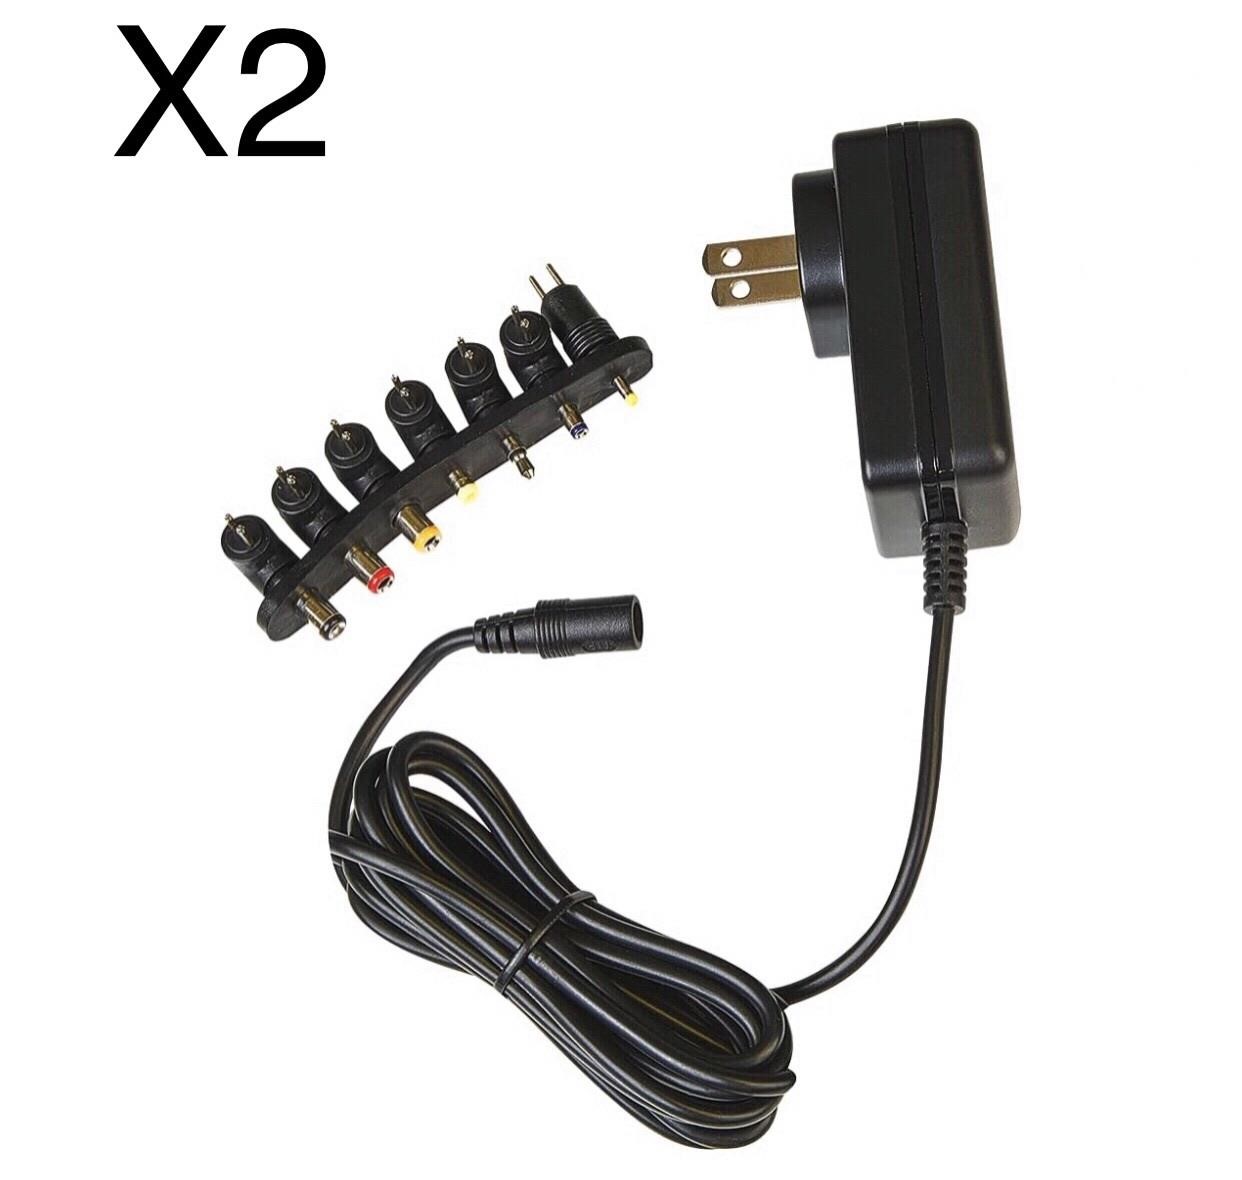 Pack of 2 RCA AC to DC Power Adapter - Universal